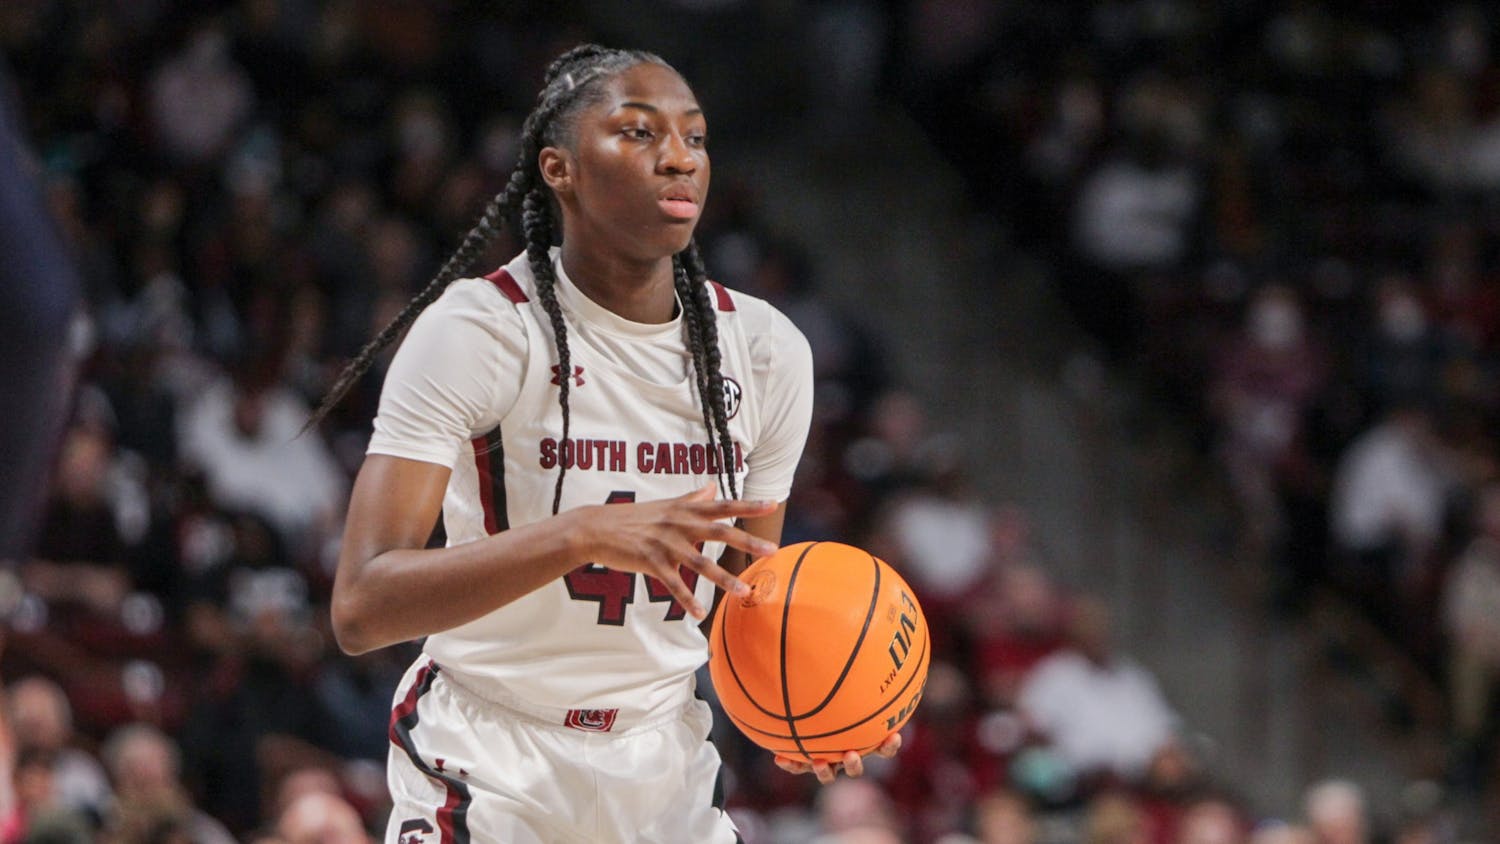 Freshman guard Saniya Rivers prepares to pass during a game on Feb. 17, 2022 at Colonial Life Arena in Columbia, SC. The Gamecocks beat Auburn 75-38.